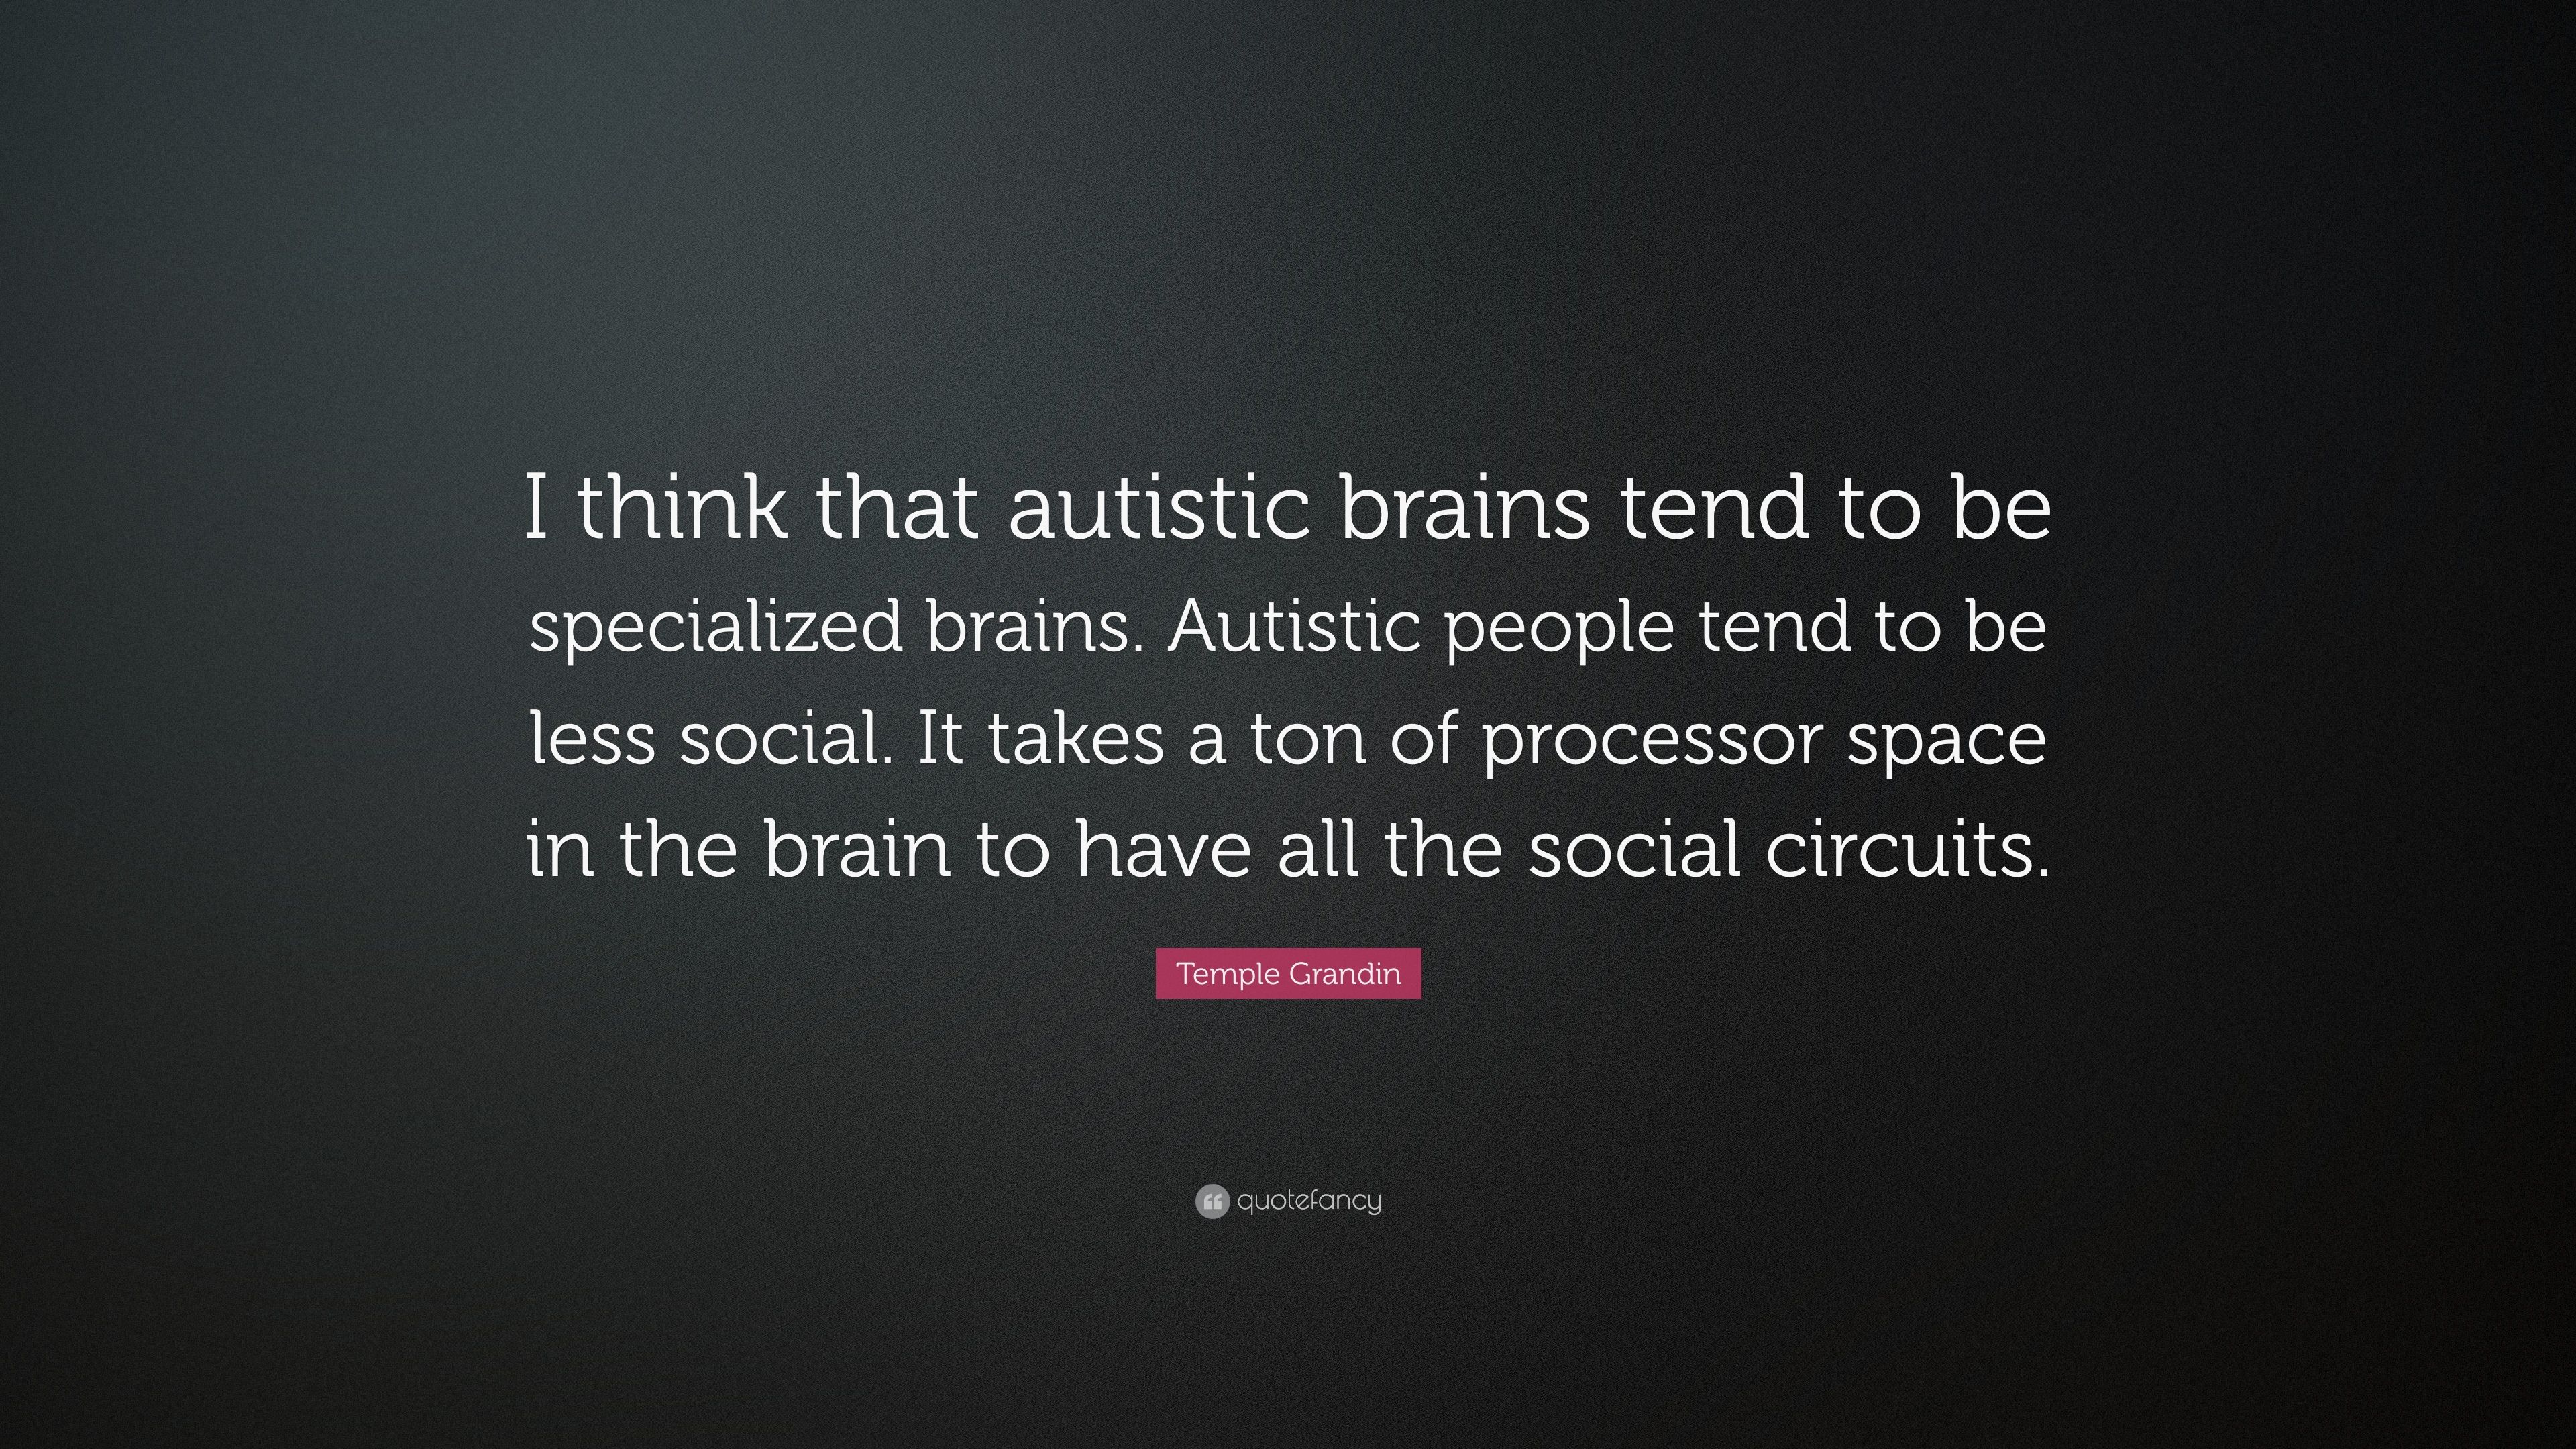 Temple Grandin Quote: “I think that autistic brains tend to be specialized brains. Autistic people tend to be less social. It takes a ton of pr.” (7 wallpaper)